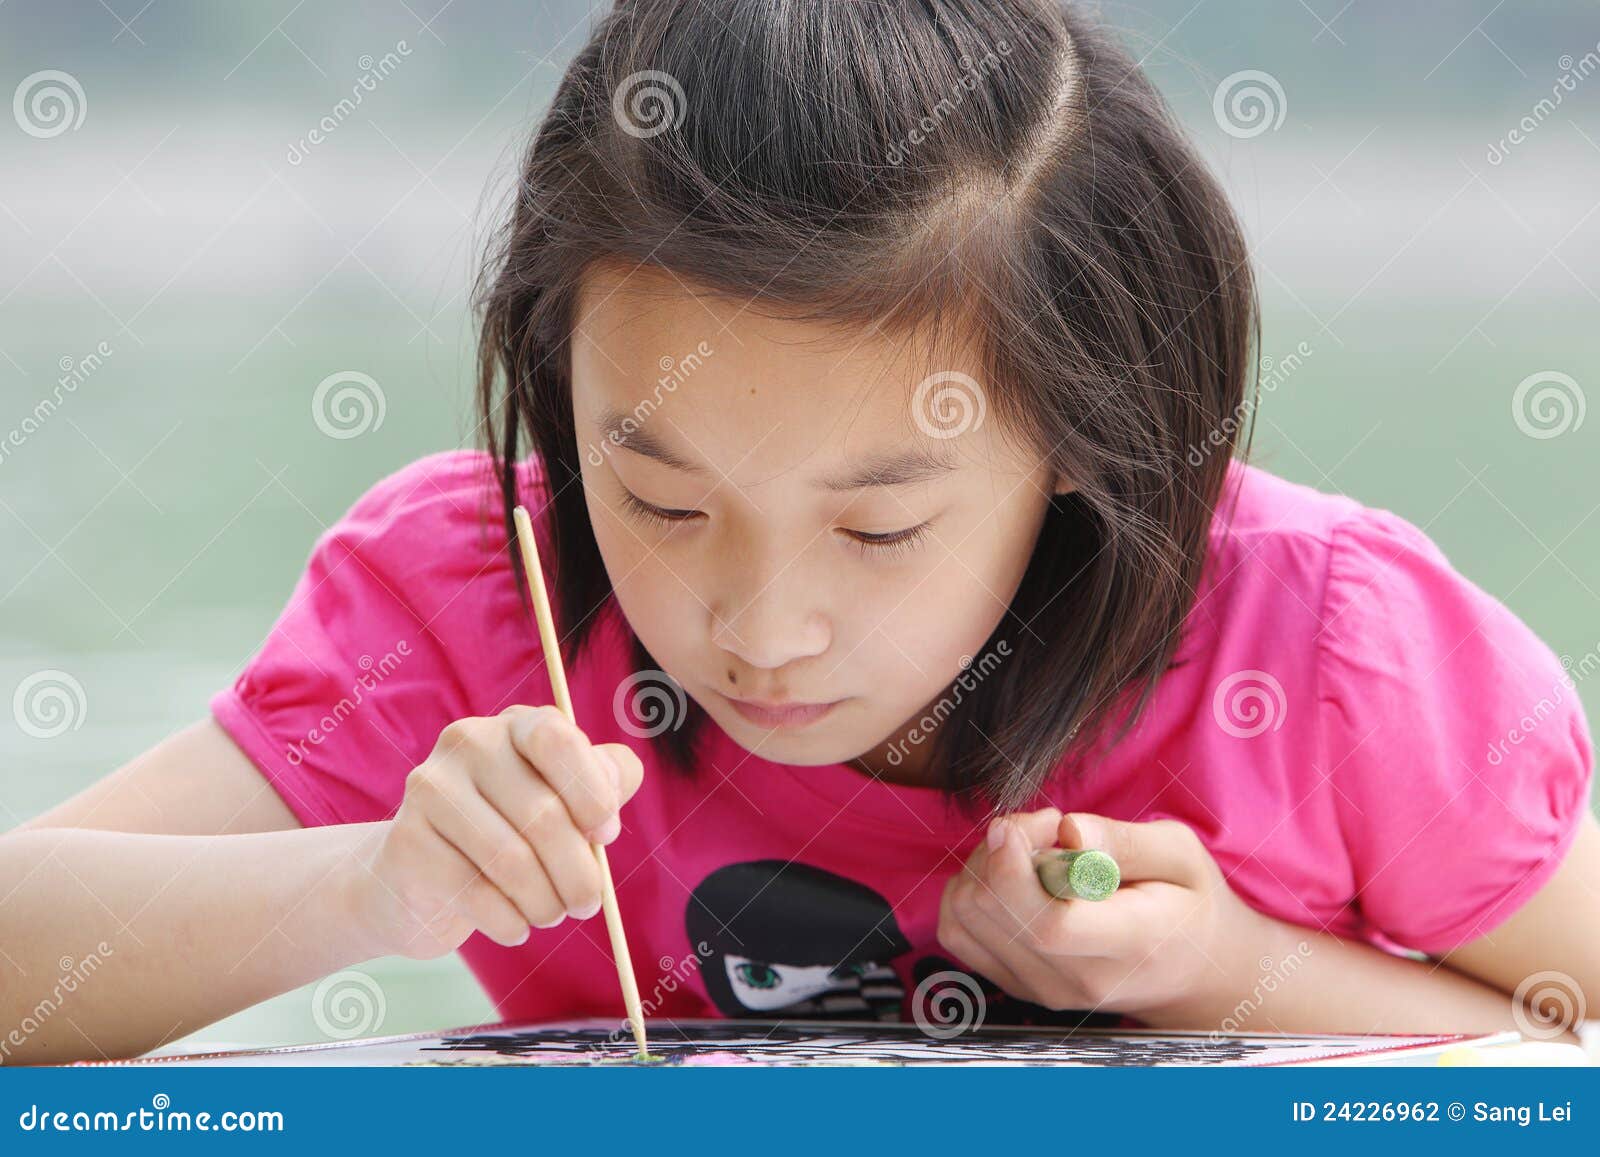 child painting absorbed